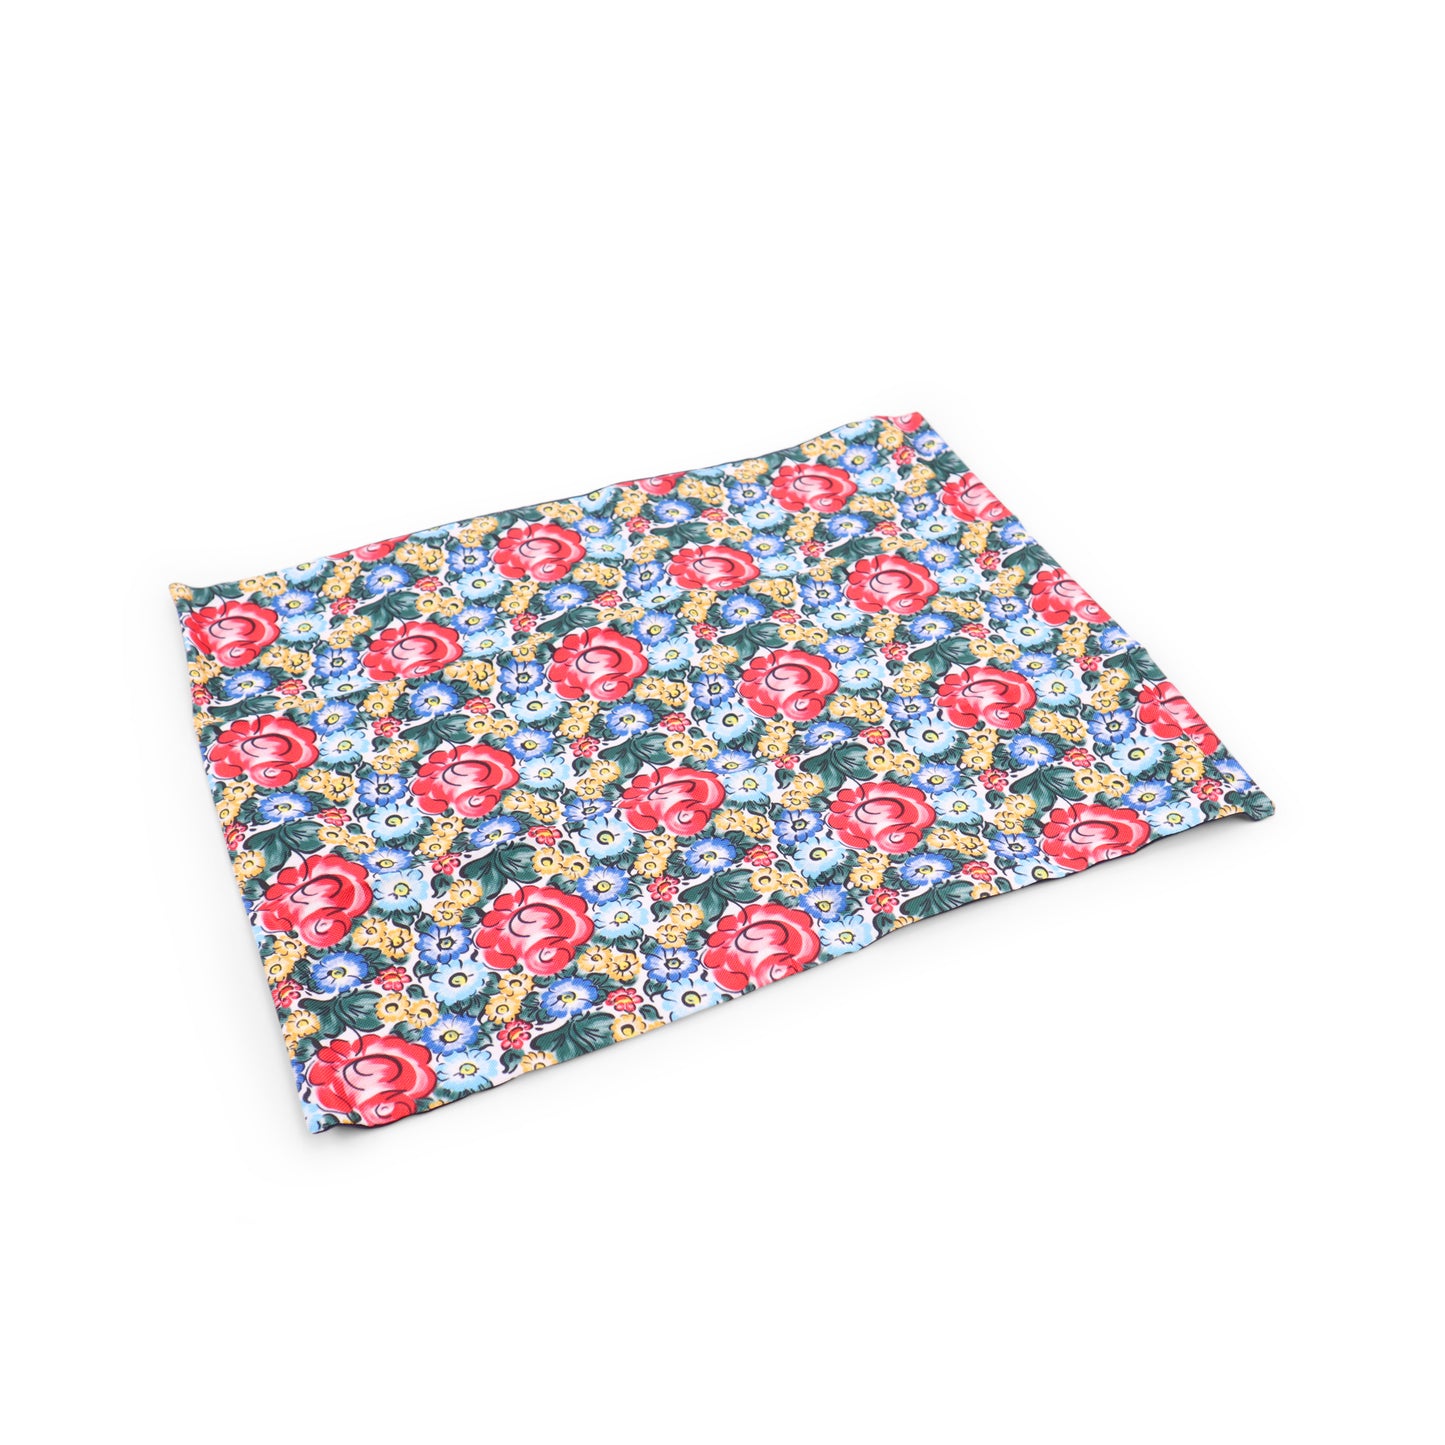 20"x14" Placemat Pack of 2. Pattern: Color